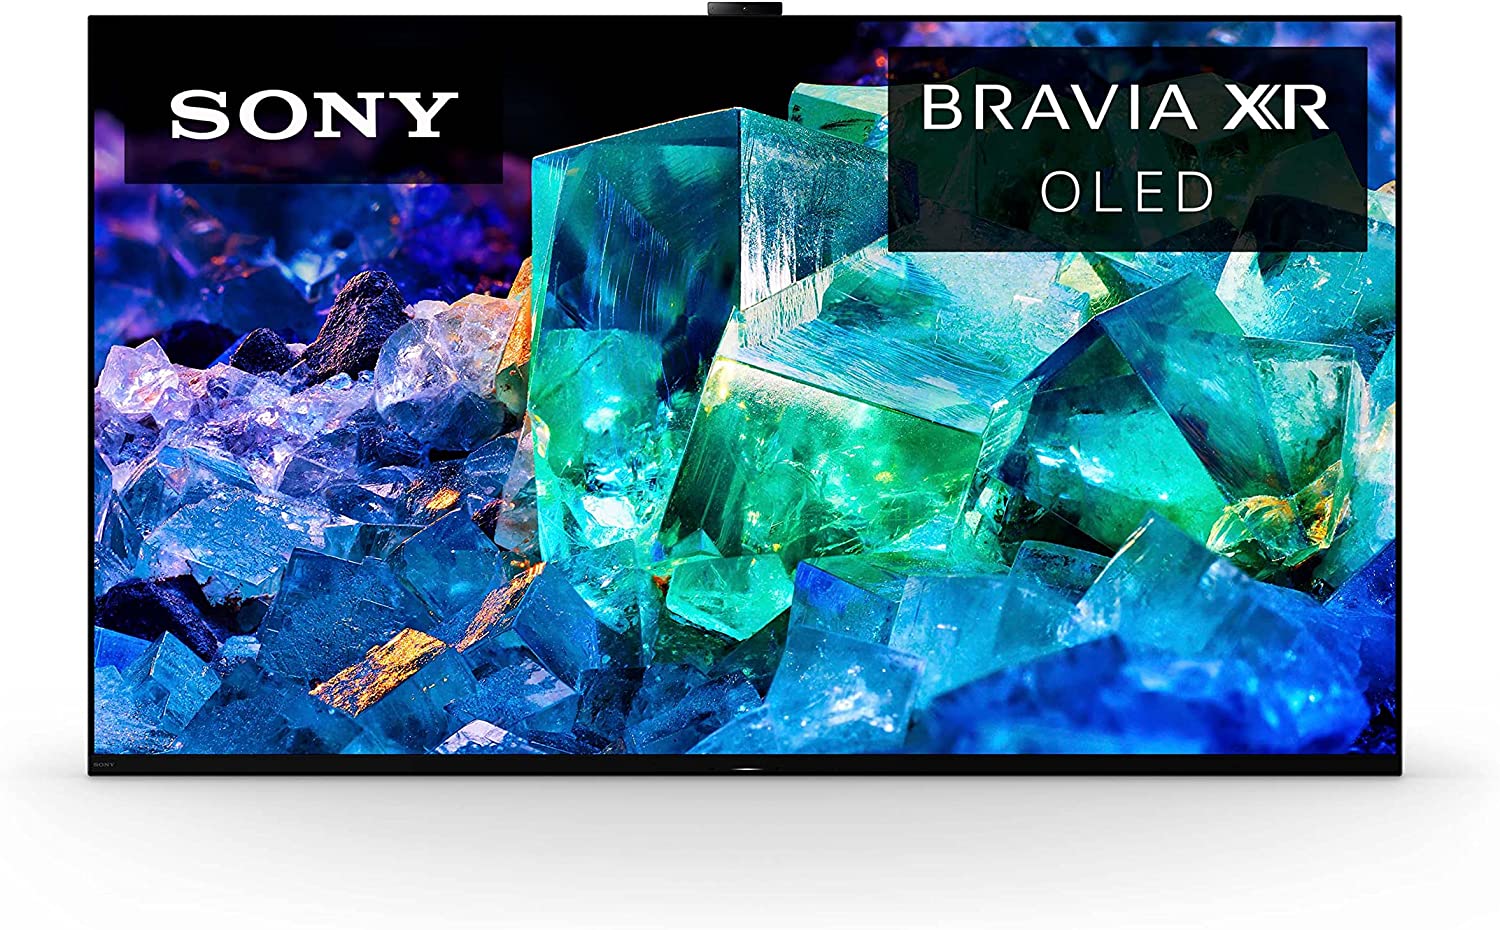 Sony X85J 55 Inch TV: 4K Ultra HD LED Smart Google TV with Native 120HZ  Refresh Rate, Dolby Vision HDR and Alexa Compatibility KD55X85J- 2021